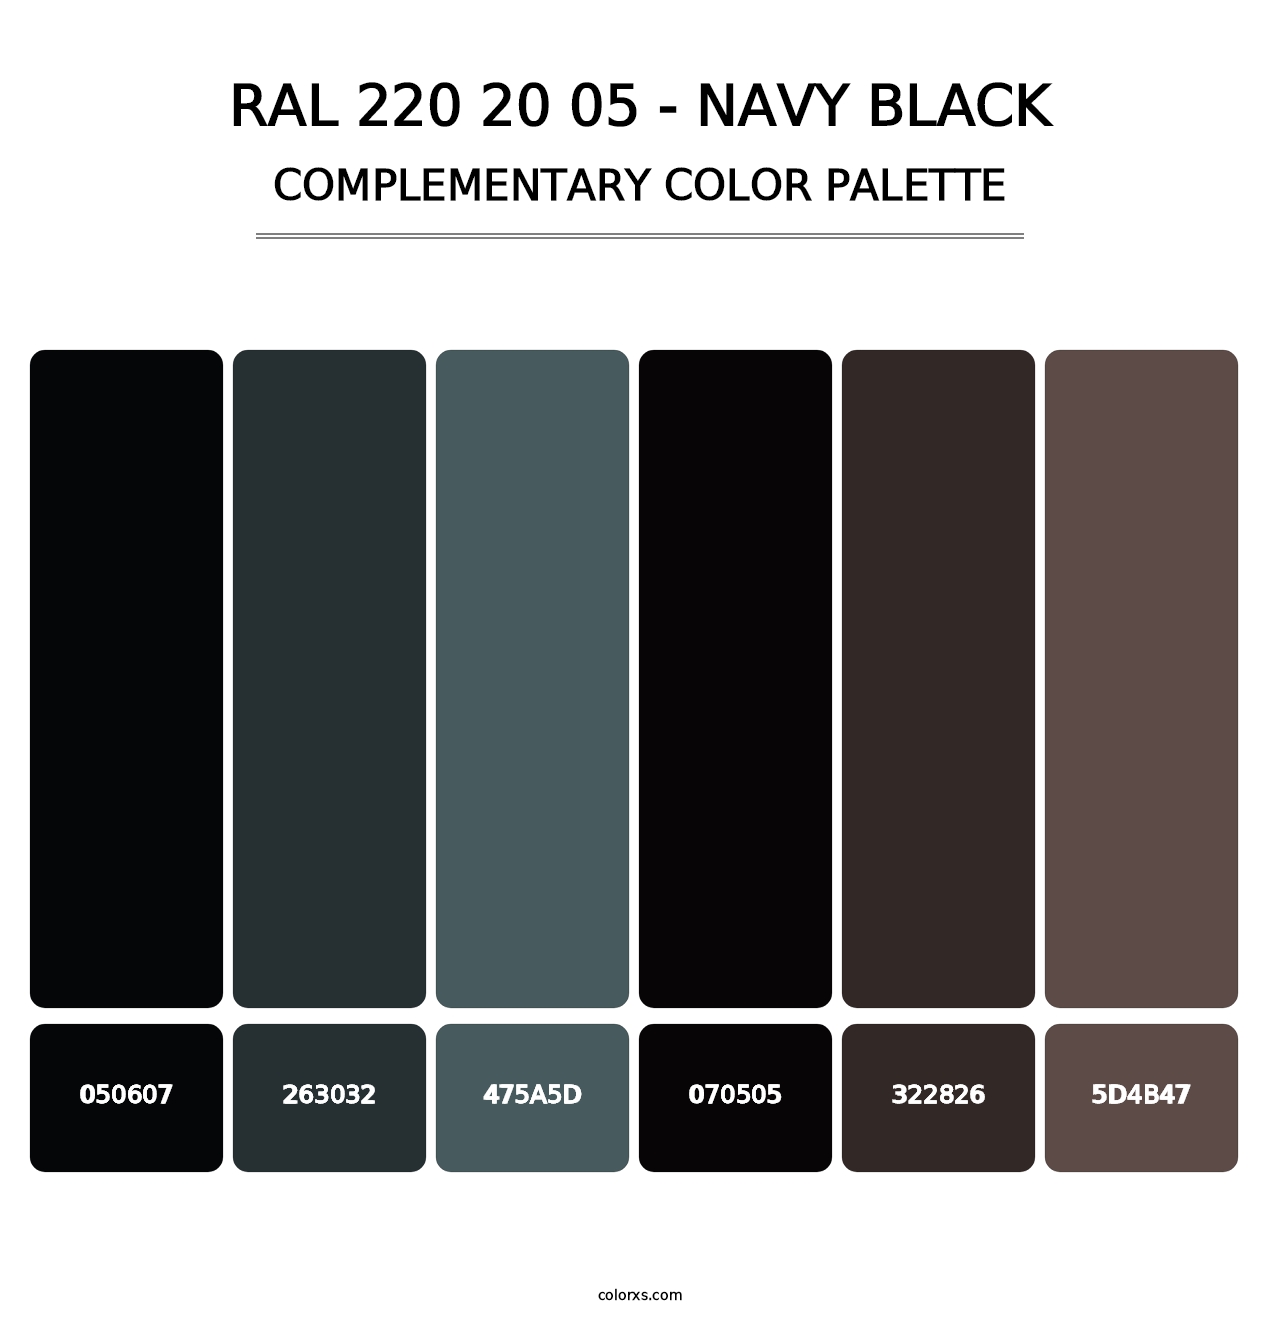 RAL 220 20 05 - Navy Black - Complementary Color Palette